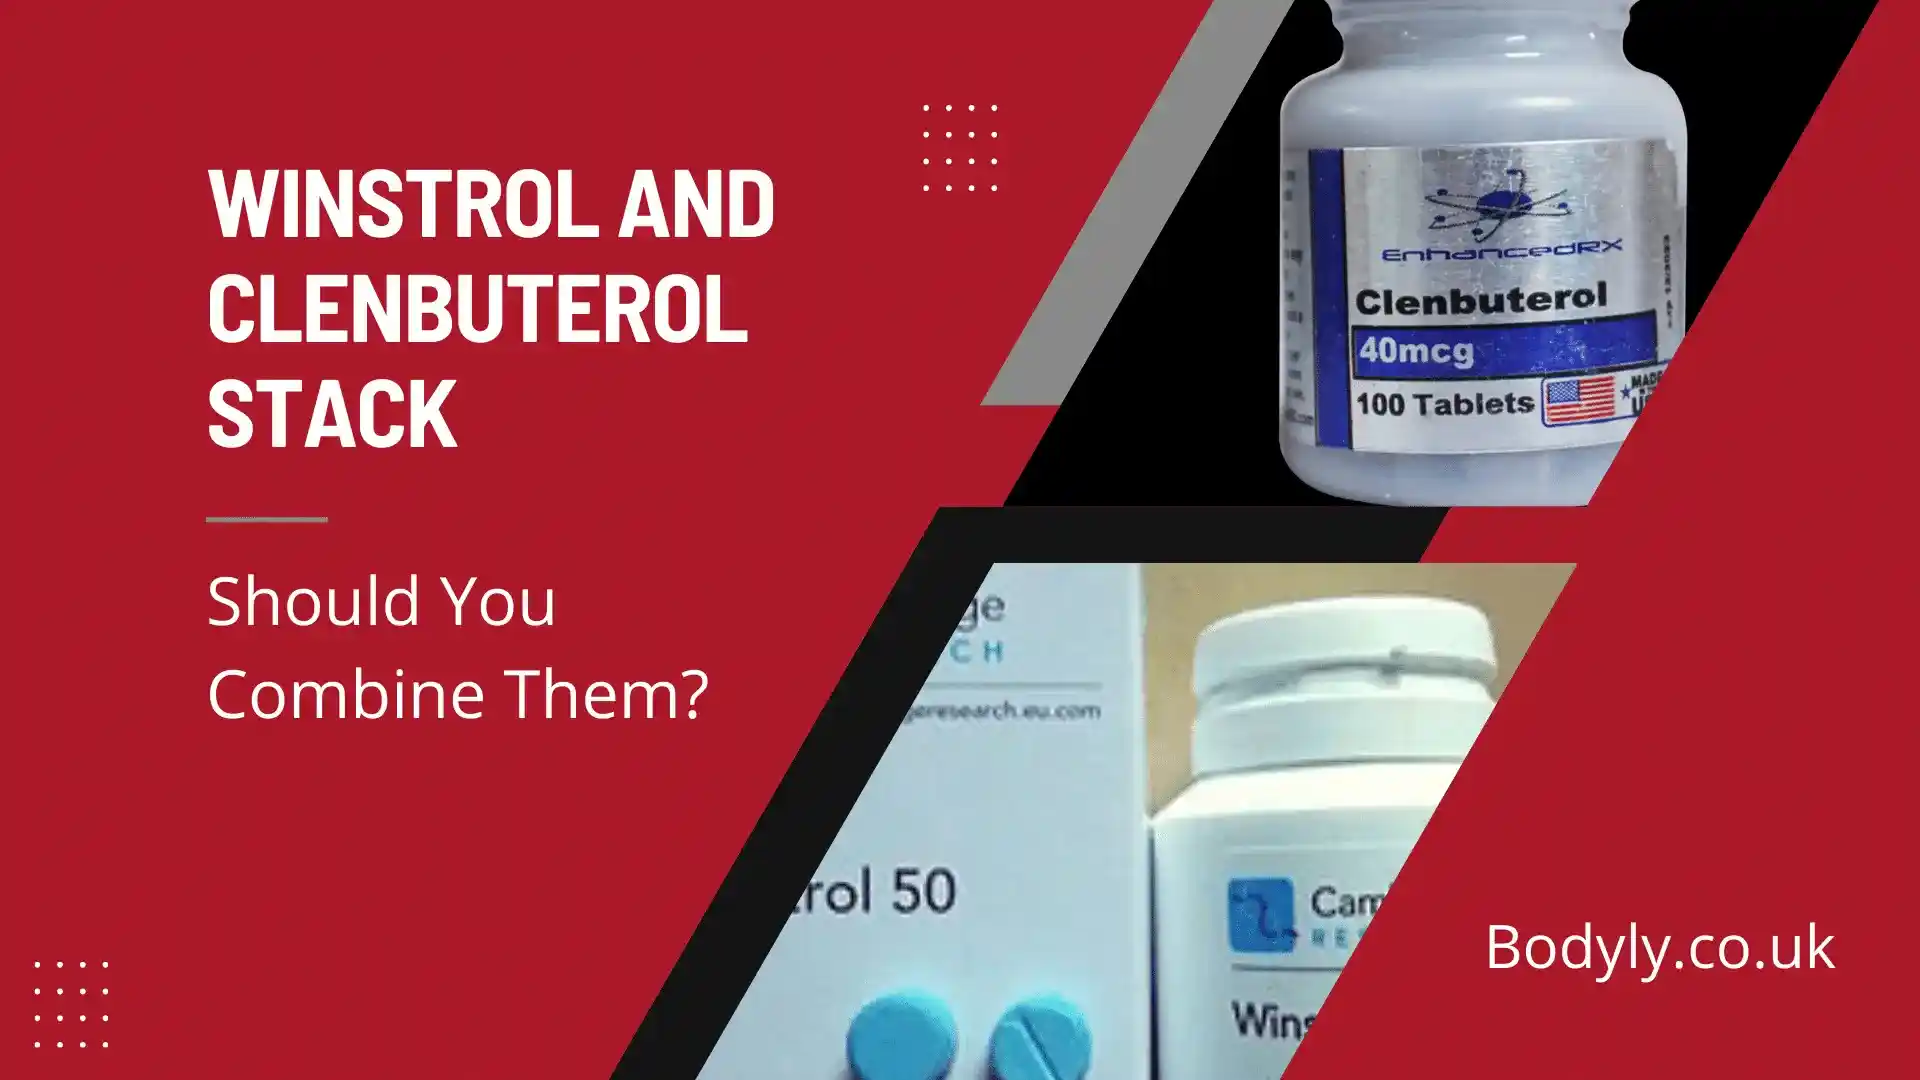 Winstrol and clenbuterol stack